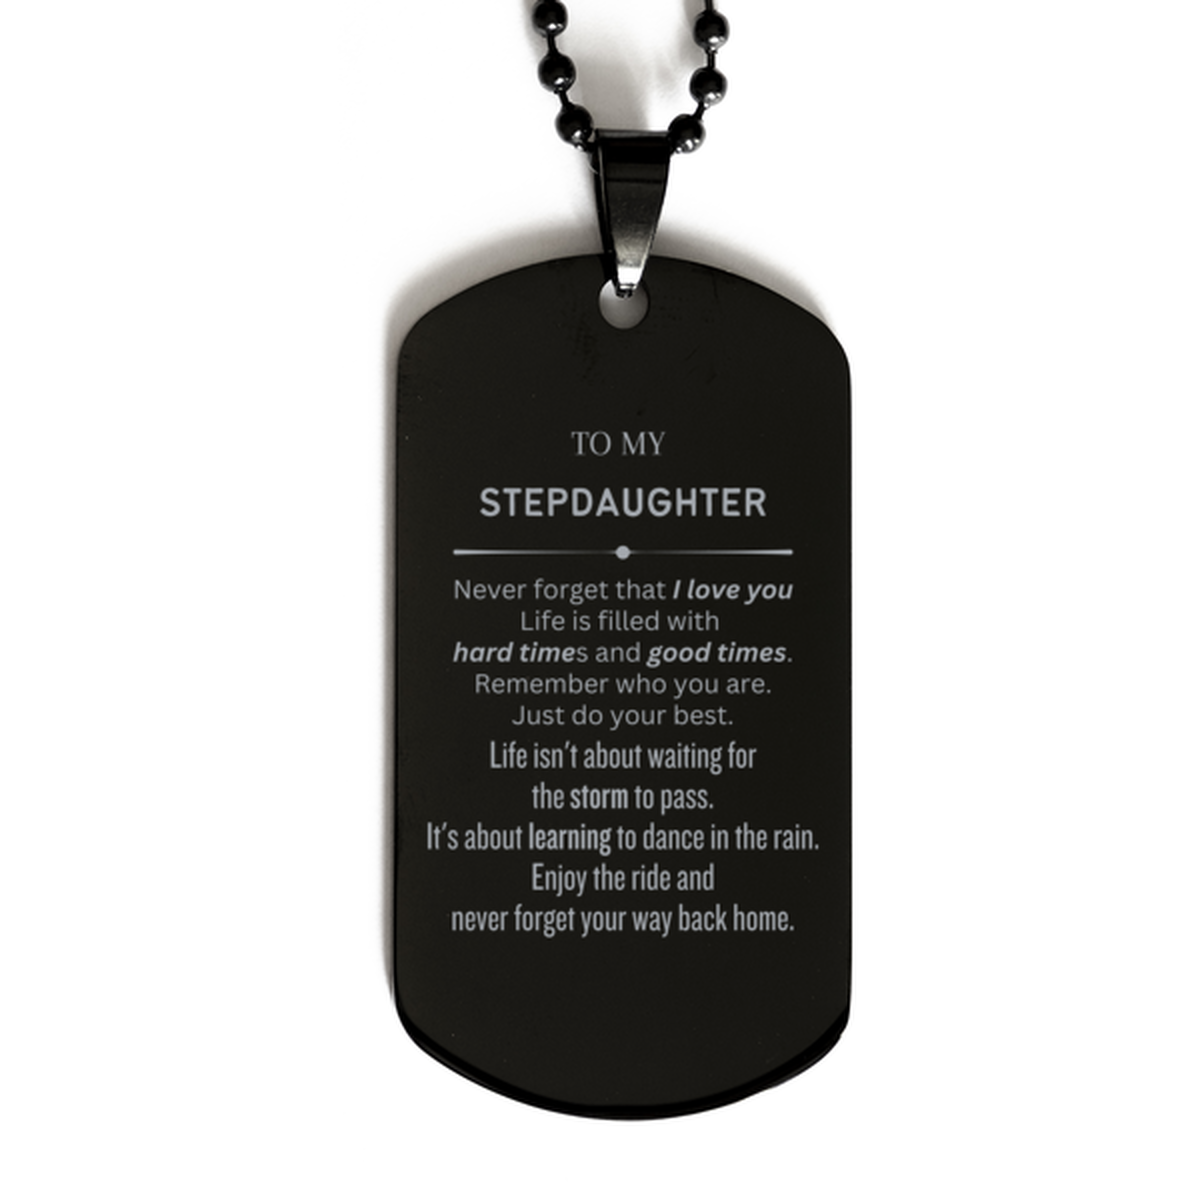 Christmas Stepdaughter Black Dog Tag Gifts, To My Stepdaughter Birthday Thank You Gifts For Stepdaughter, Graduation Unique Gifts For Stepdaughter To My Stepdaughter Never forget that I love you life is filled with hard times and good times. Remember who